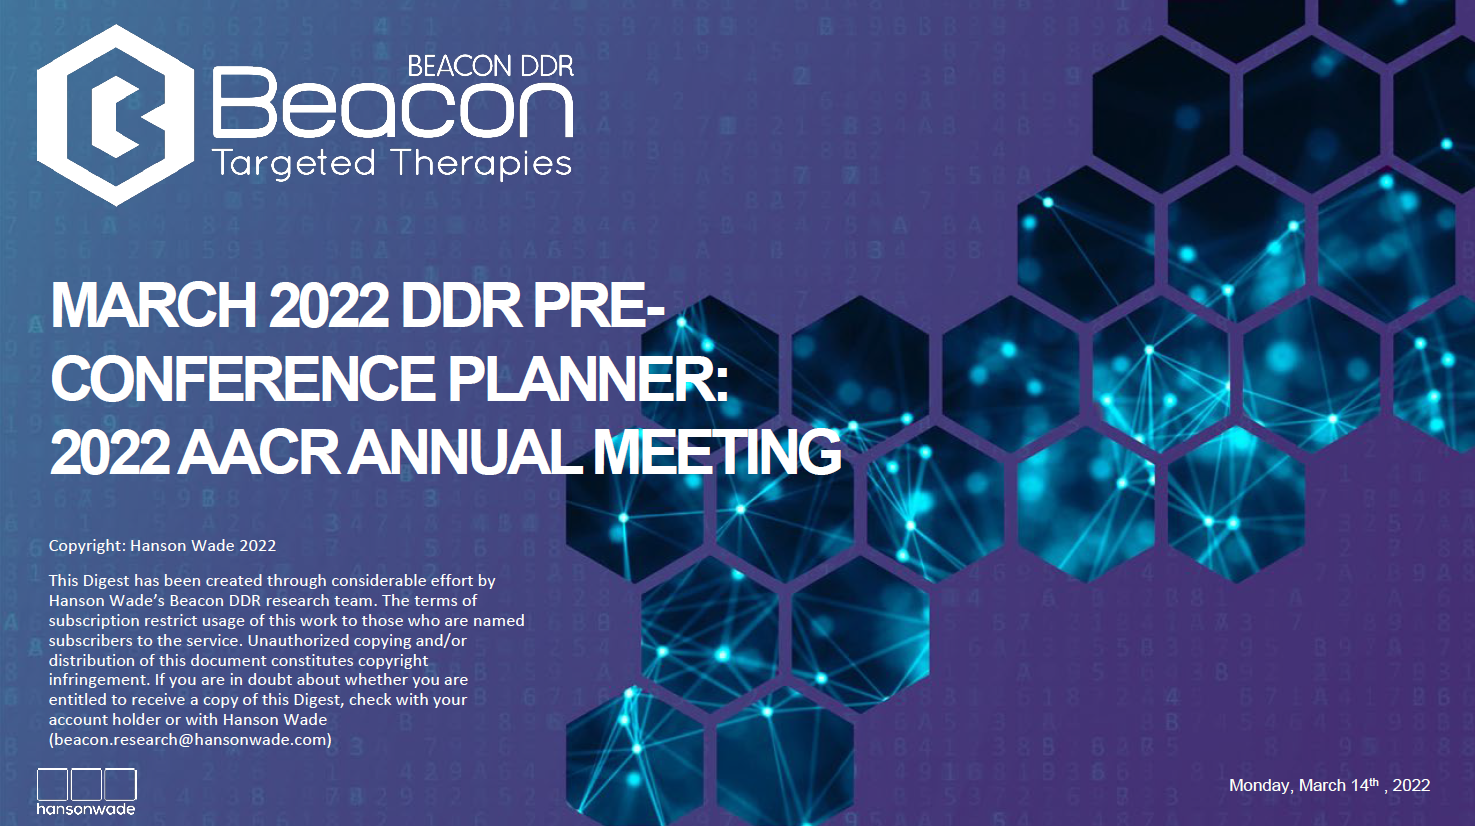 March 2022 DDR Pre -Conference Planner 2022 AACR Annual Meeting